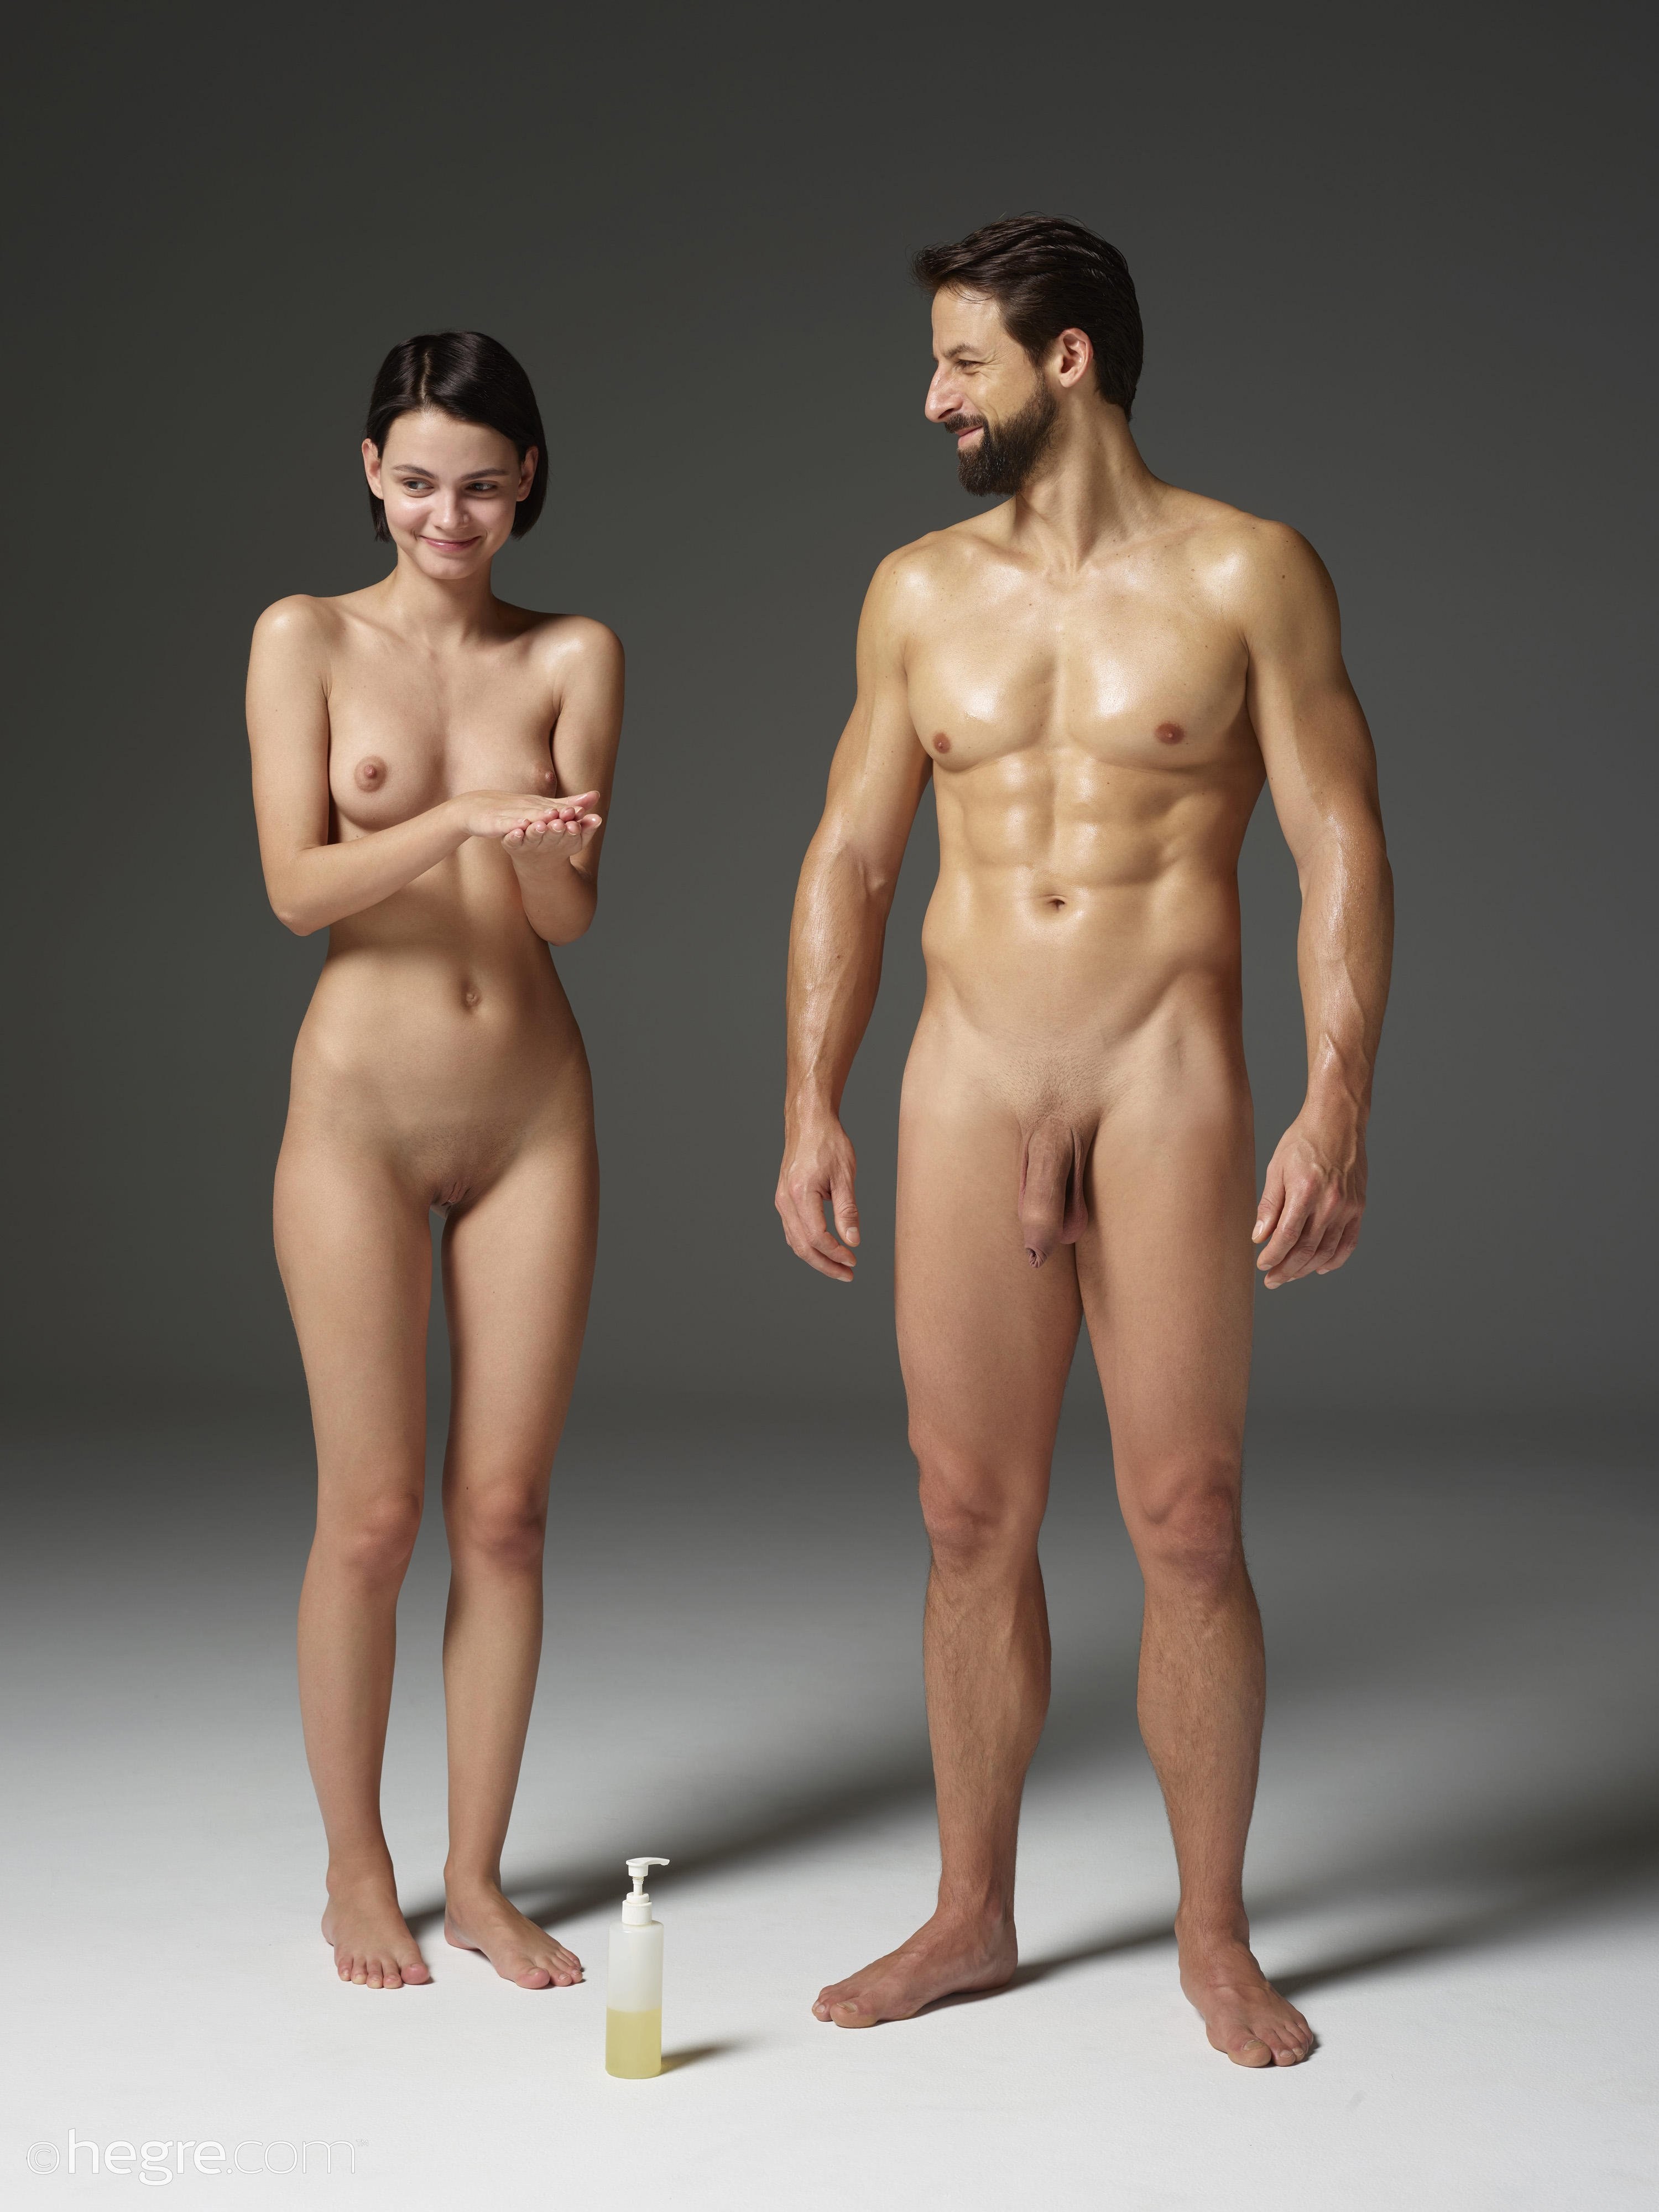 Full frontal nude couples